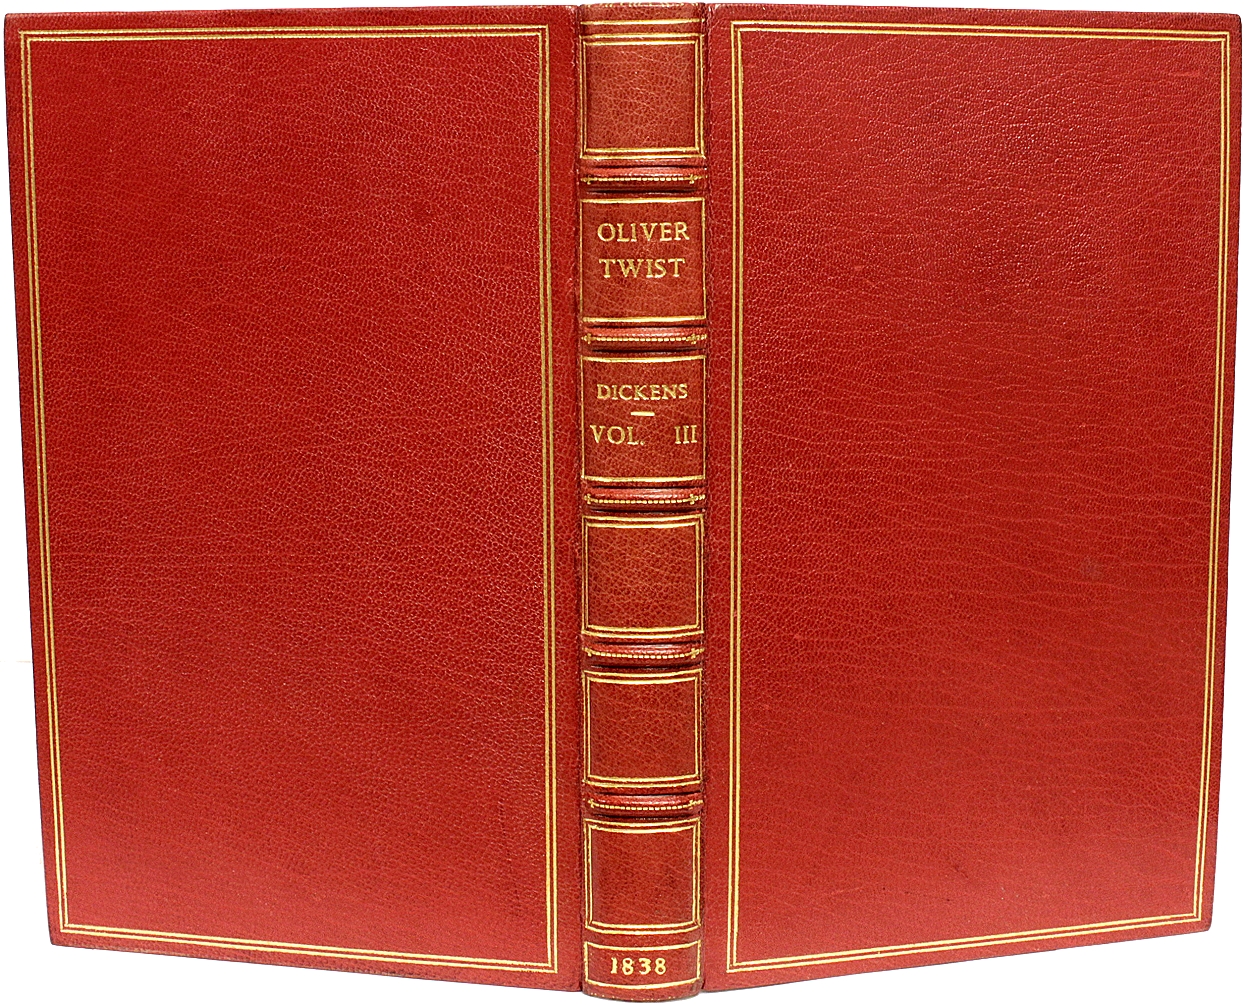 Oliver Twist and Great Expectations by Charles Dickens / 1930s Illustrated  Edition / Red Faux Leather, Gilt Decoration/ In Good Condition